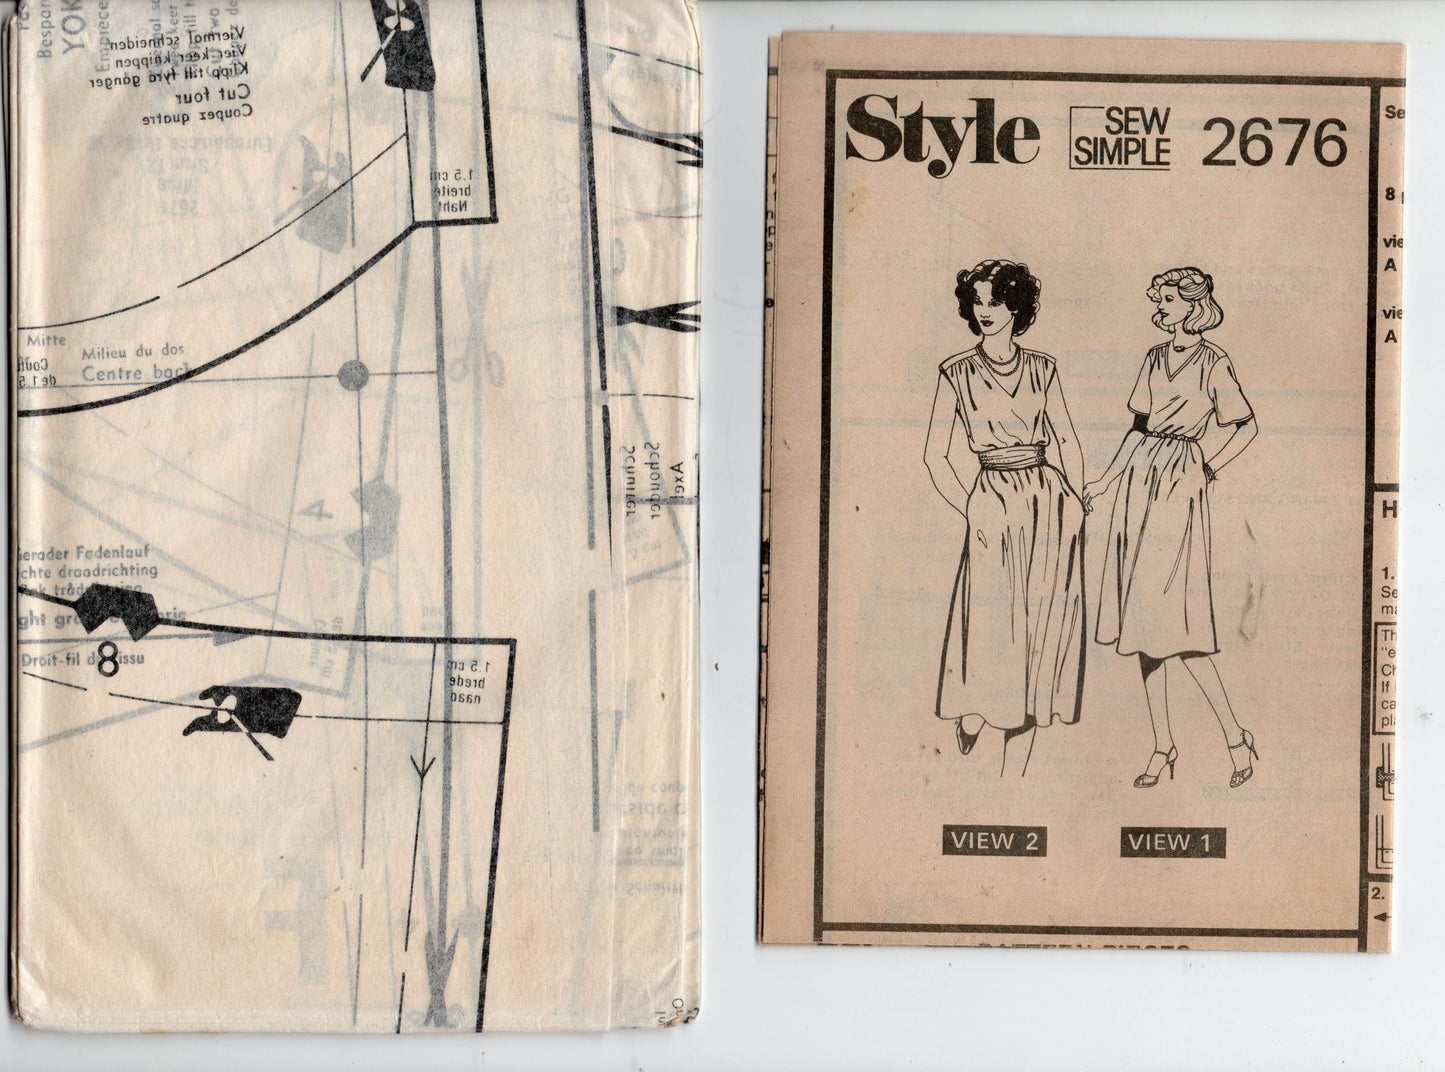 Style 2676 Womens EASY V Neck Yoked Dress with Pockets 1970s Vintage Sewing Pattern Size 12 Bust 34 inches UNCUT Factory Folded